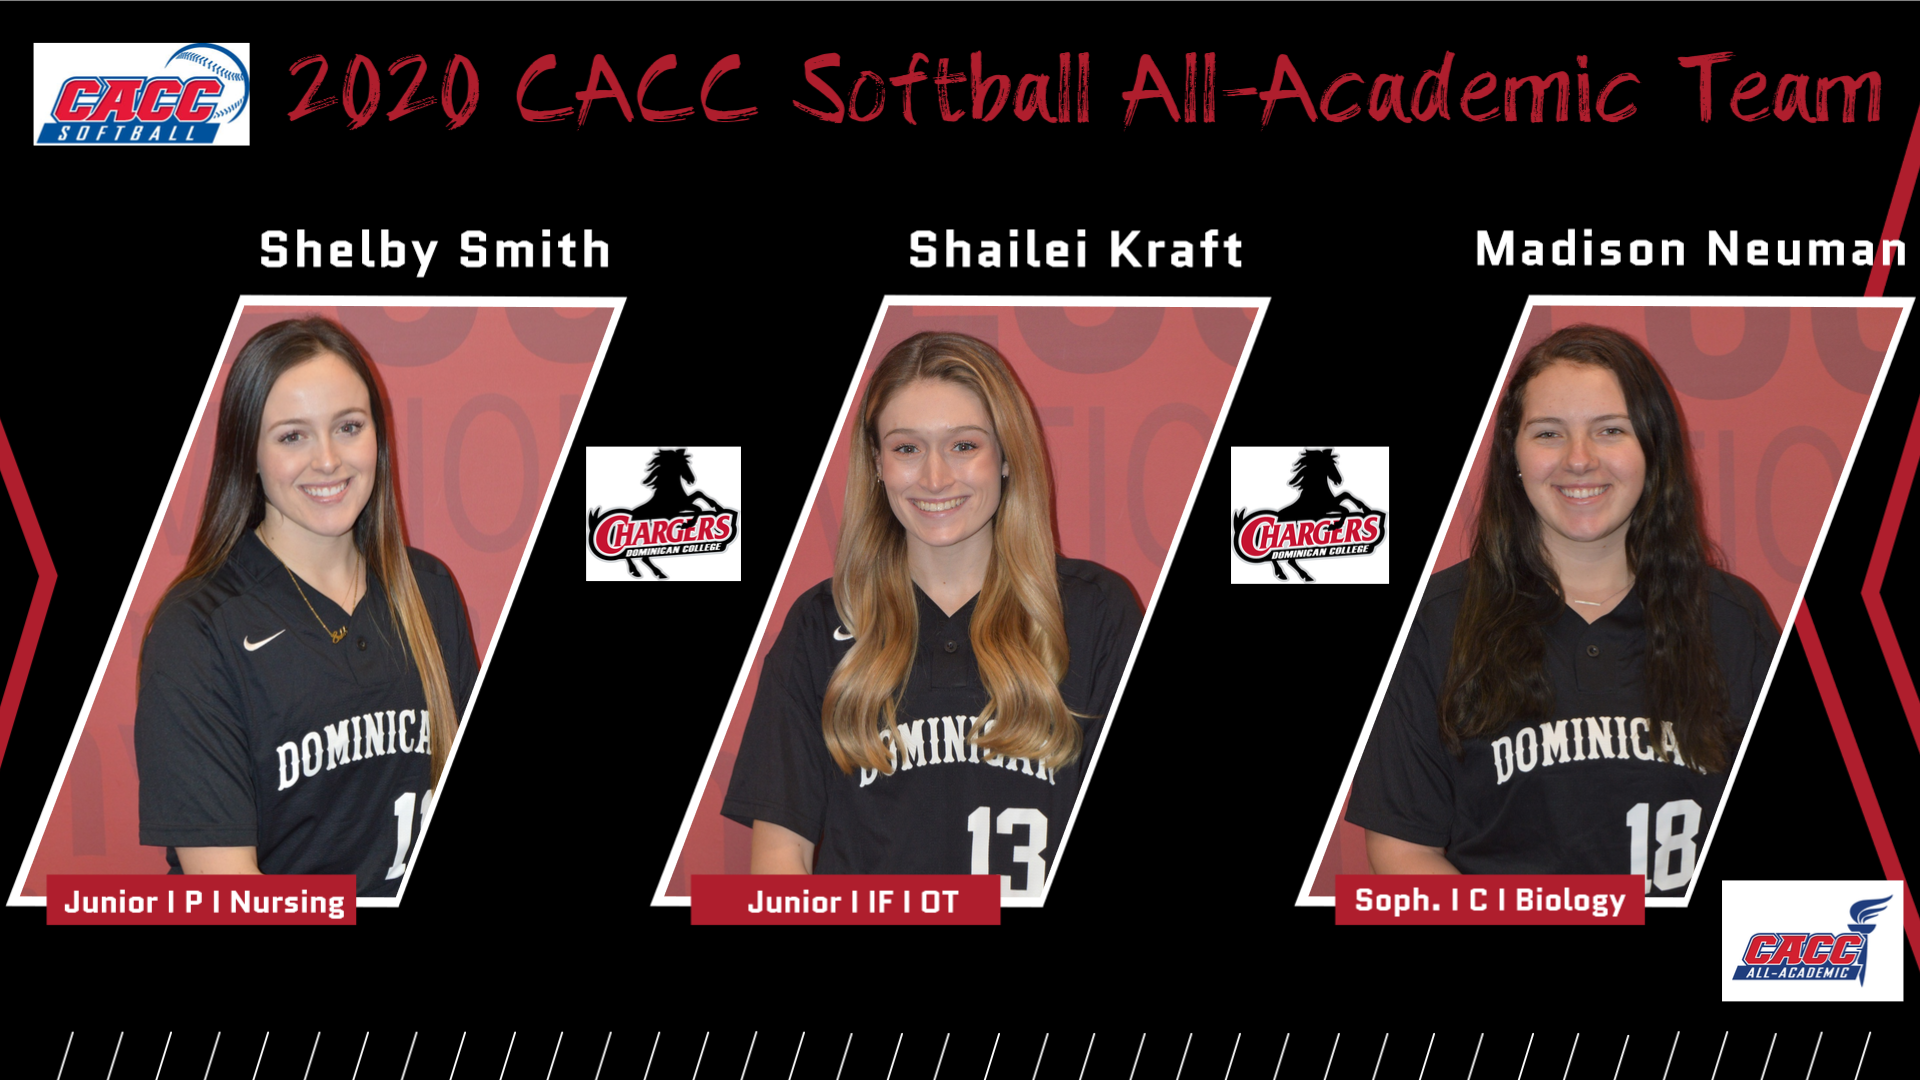 DOMINICAN TRIO NAMED TO 2020 CACC SOFTBALL ALL-ACADEMIC TEAM